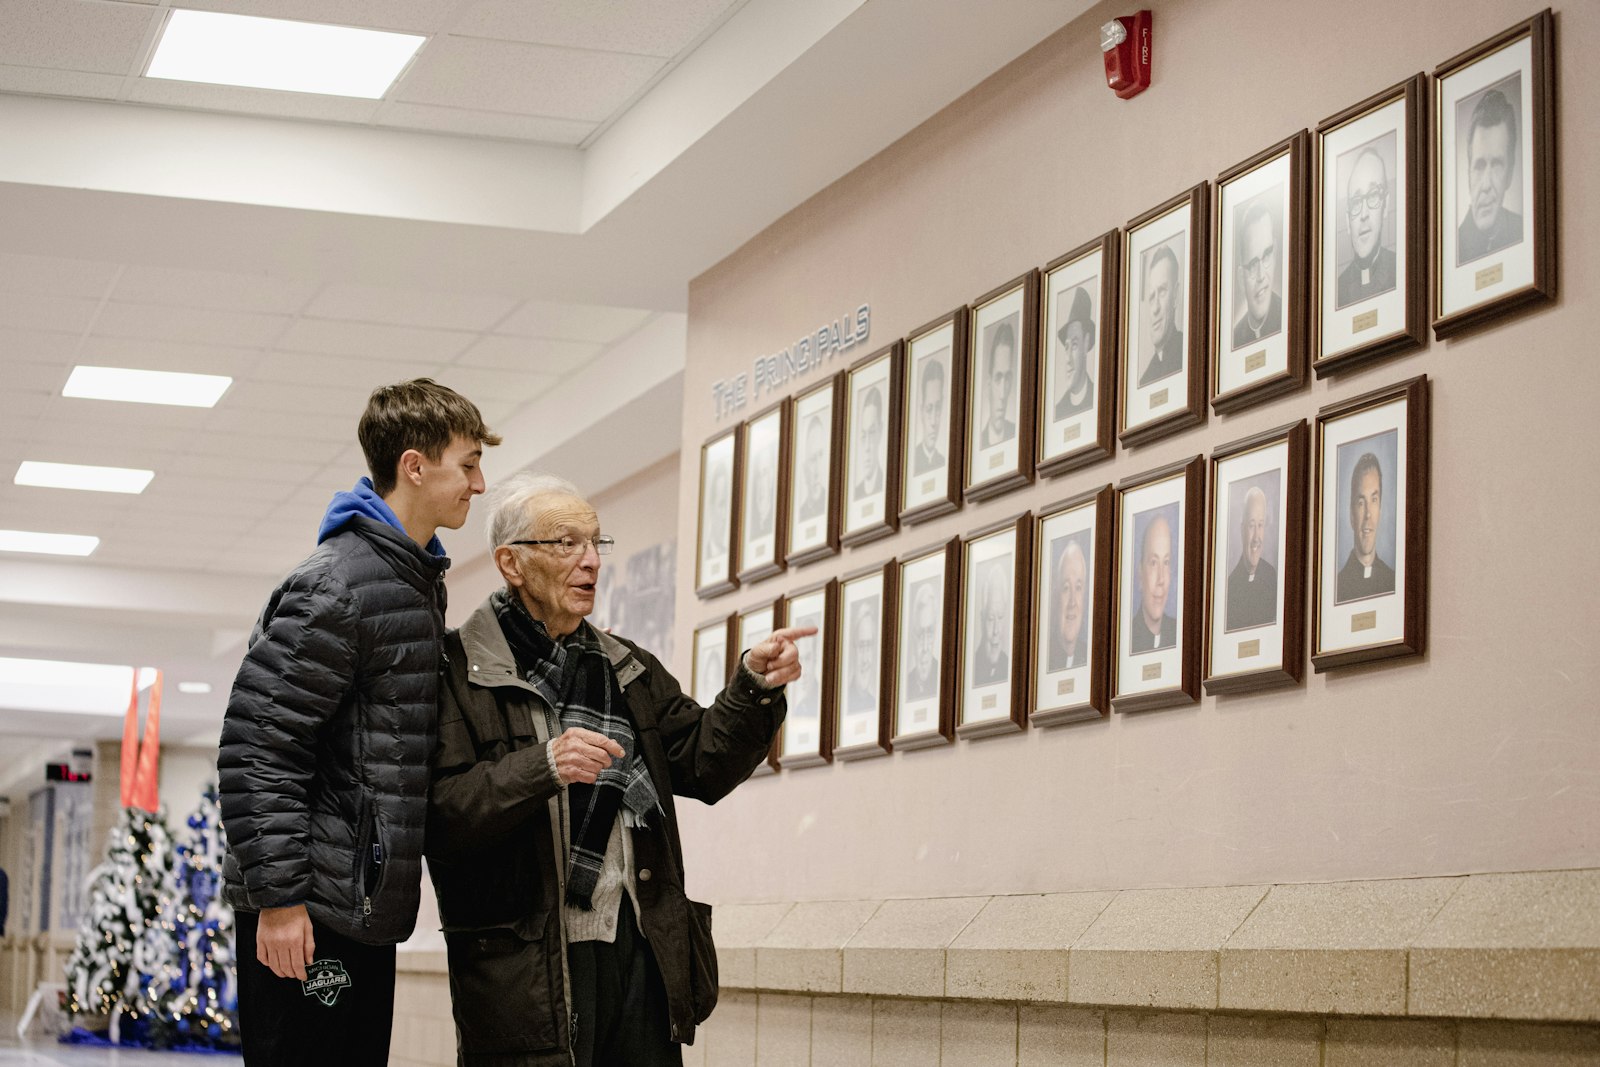 The Basilian Fathers have staffed Catholic Central High School for more than 95 years, having previously served in other ministries throughout the Archdiocese of Detroit, including for more than 125 years at Ste. Anne Parish in Detroit.